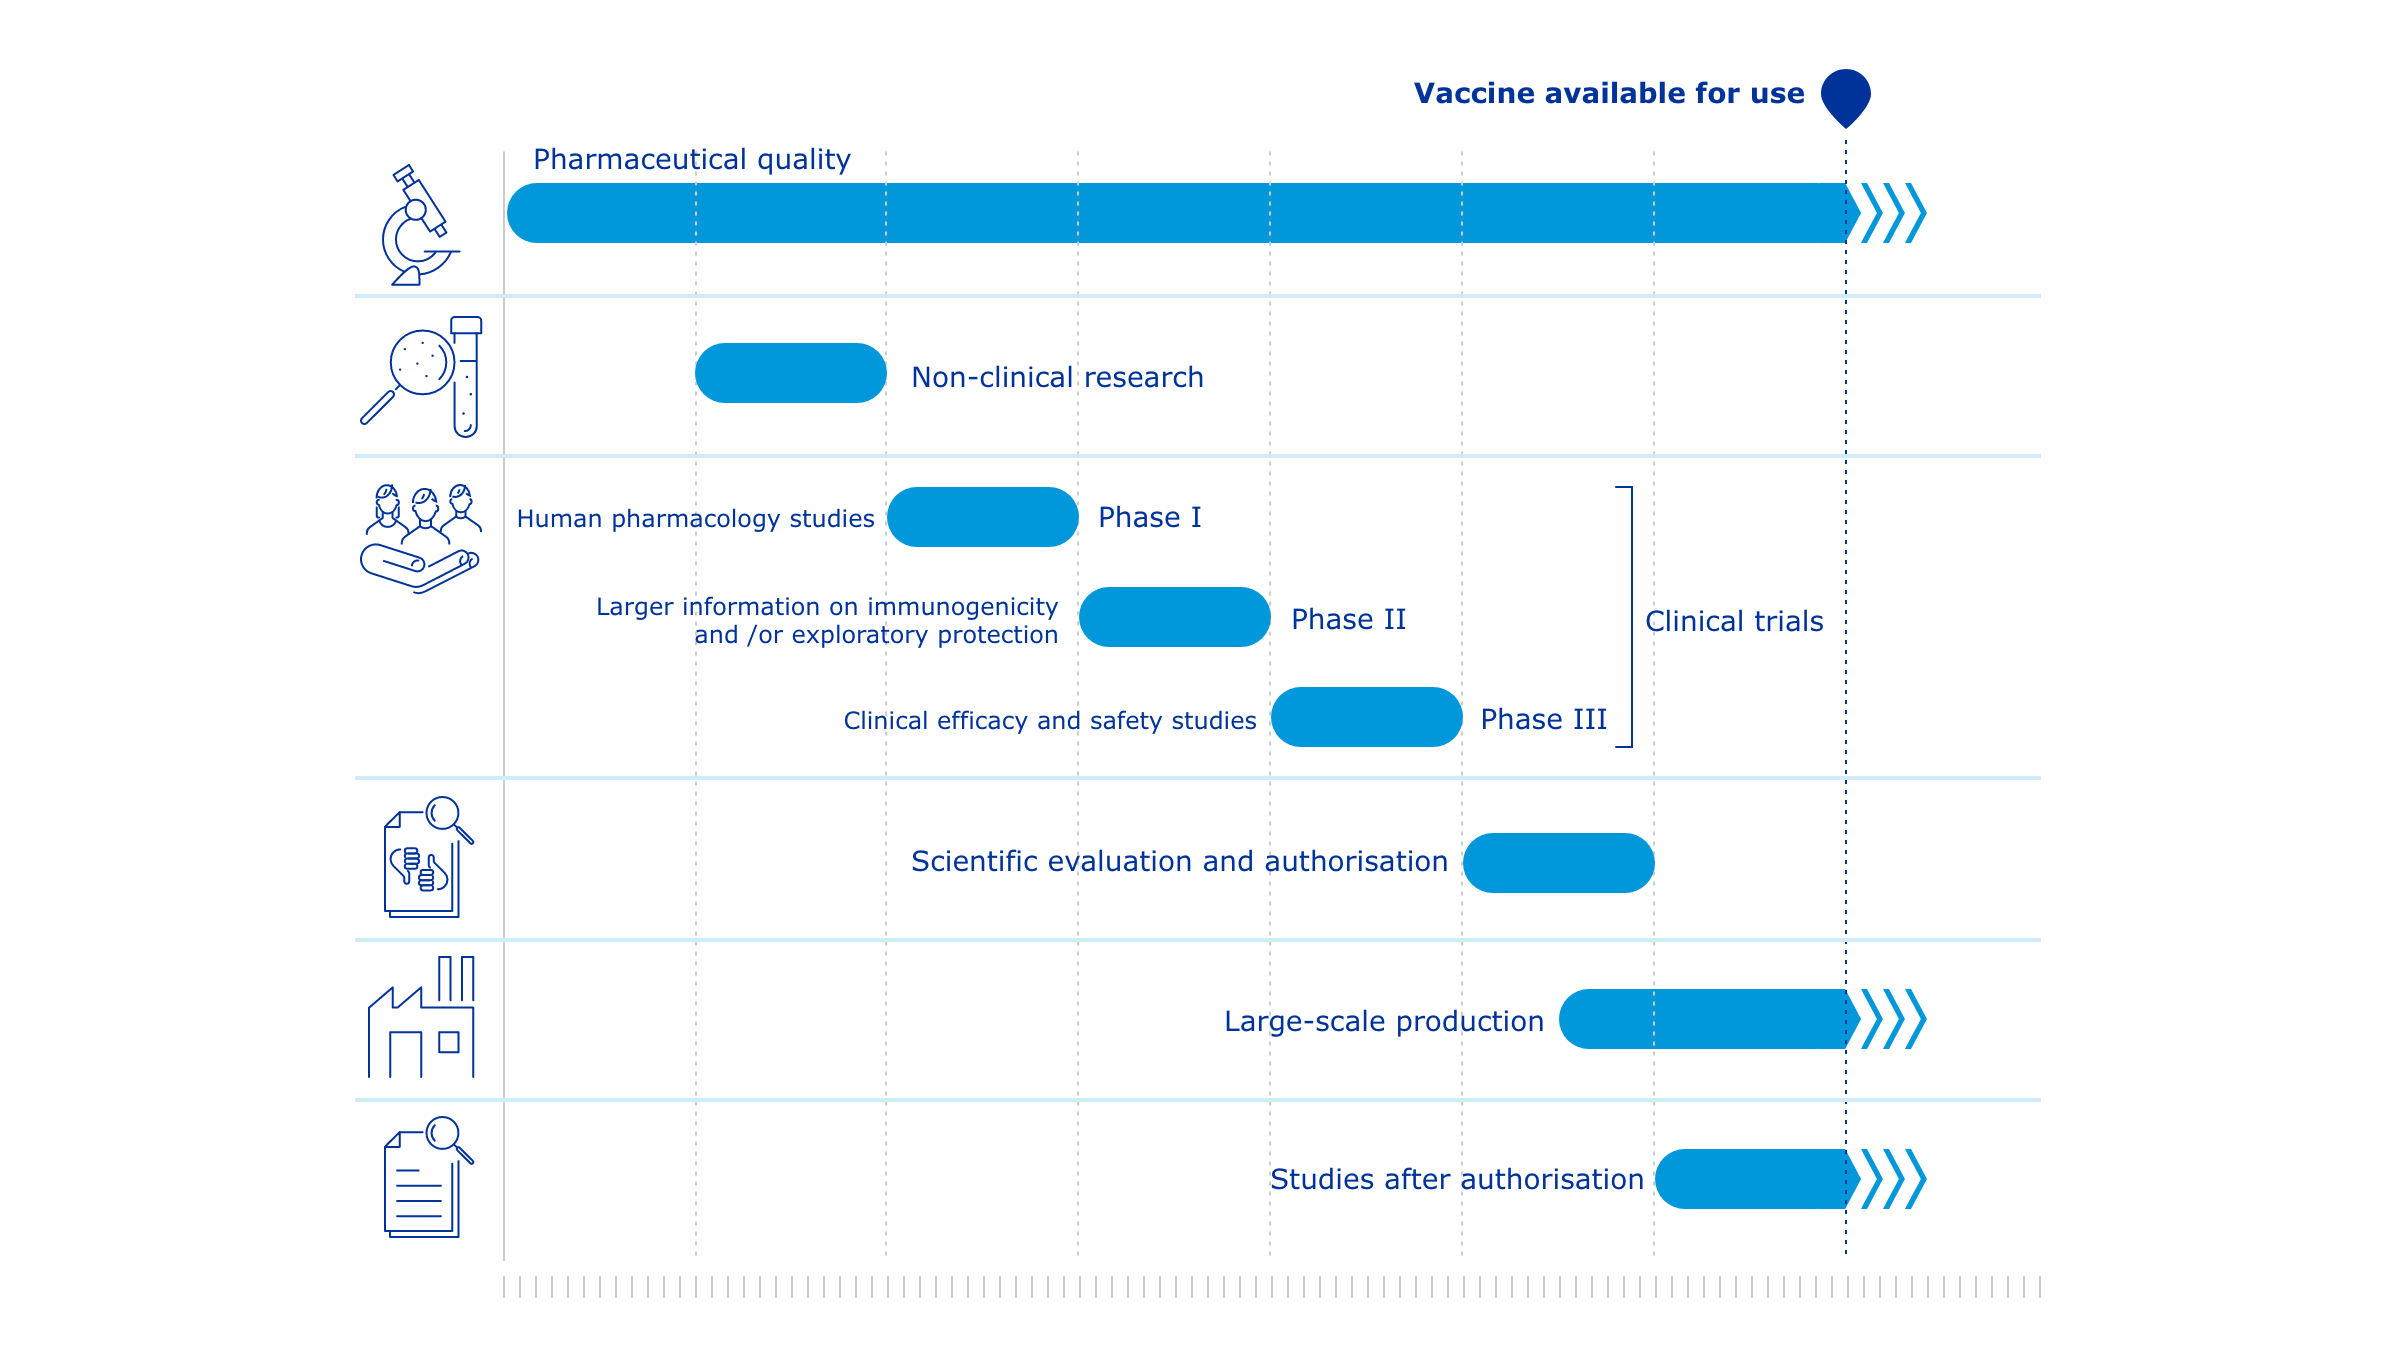 Indicative timelines for standard vaccines